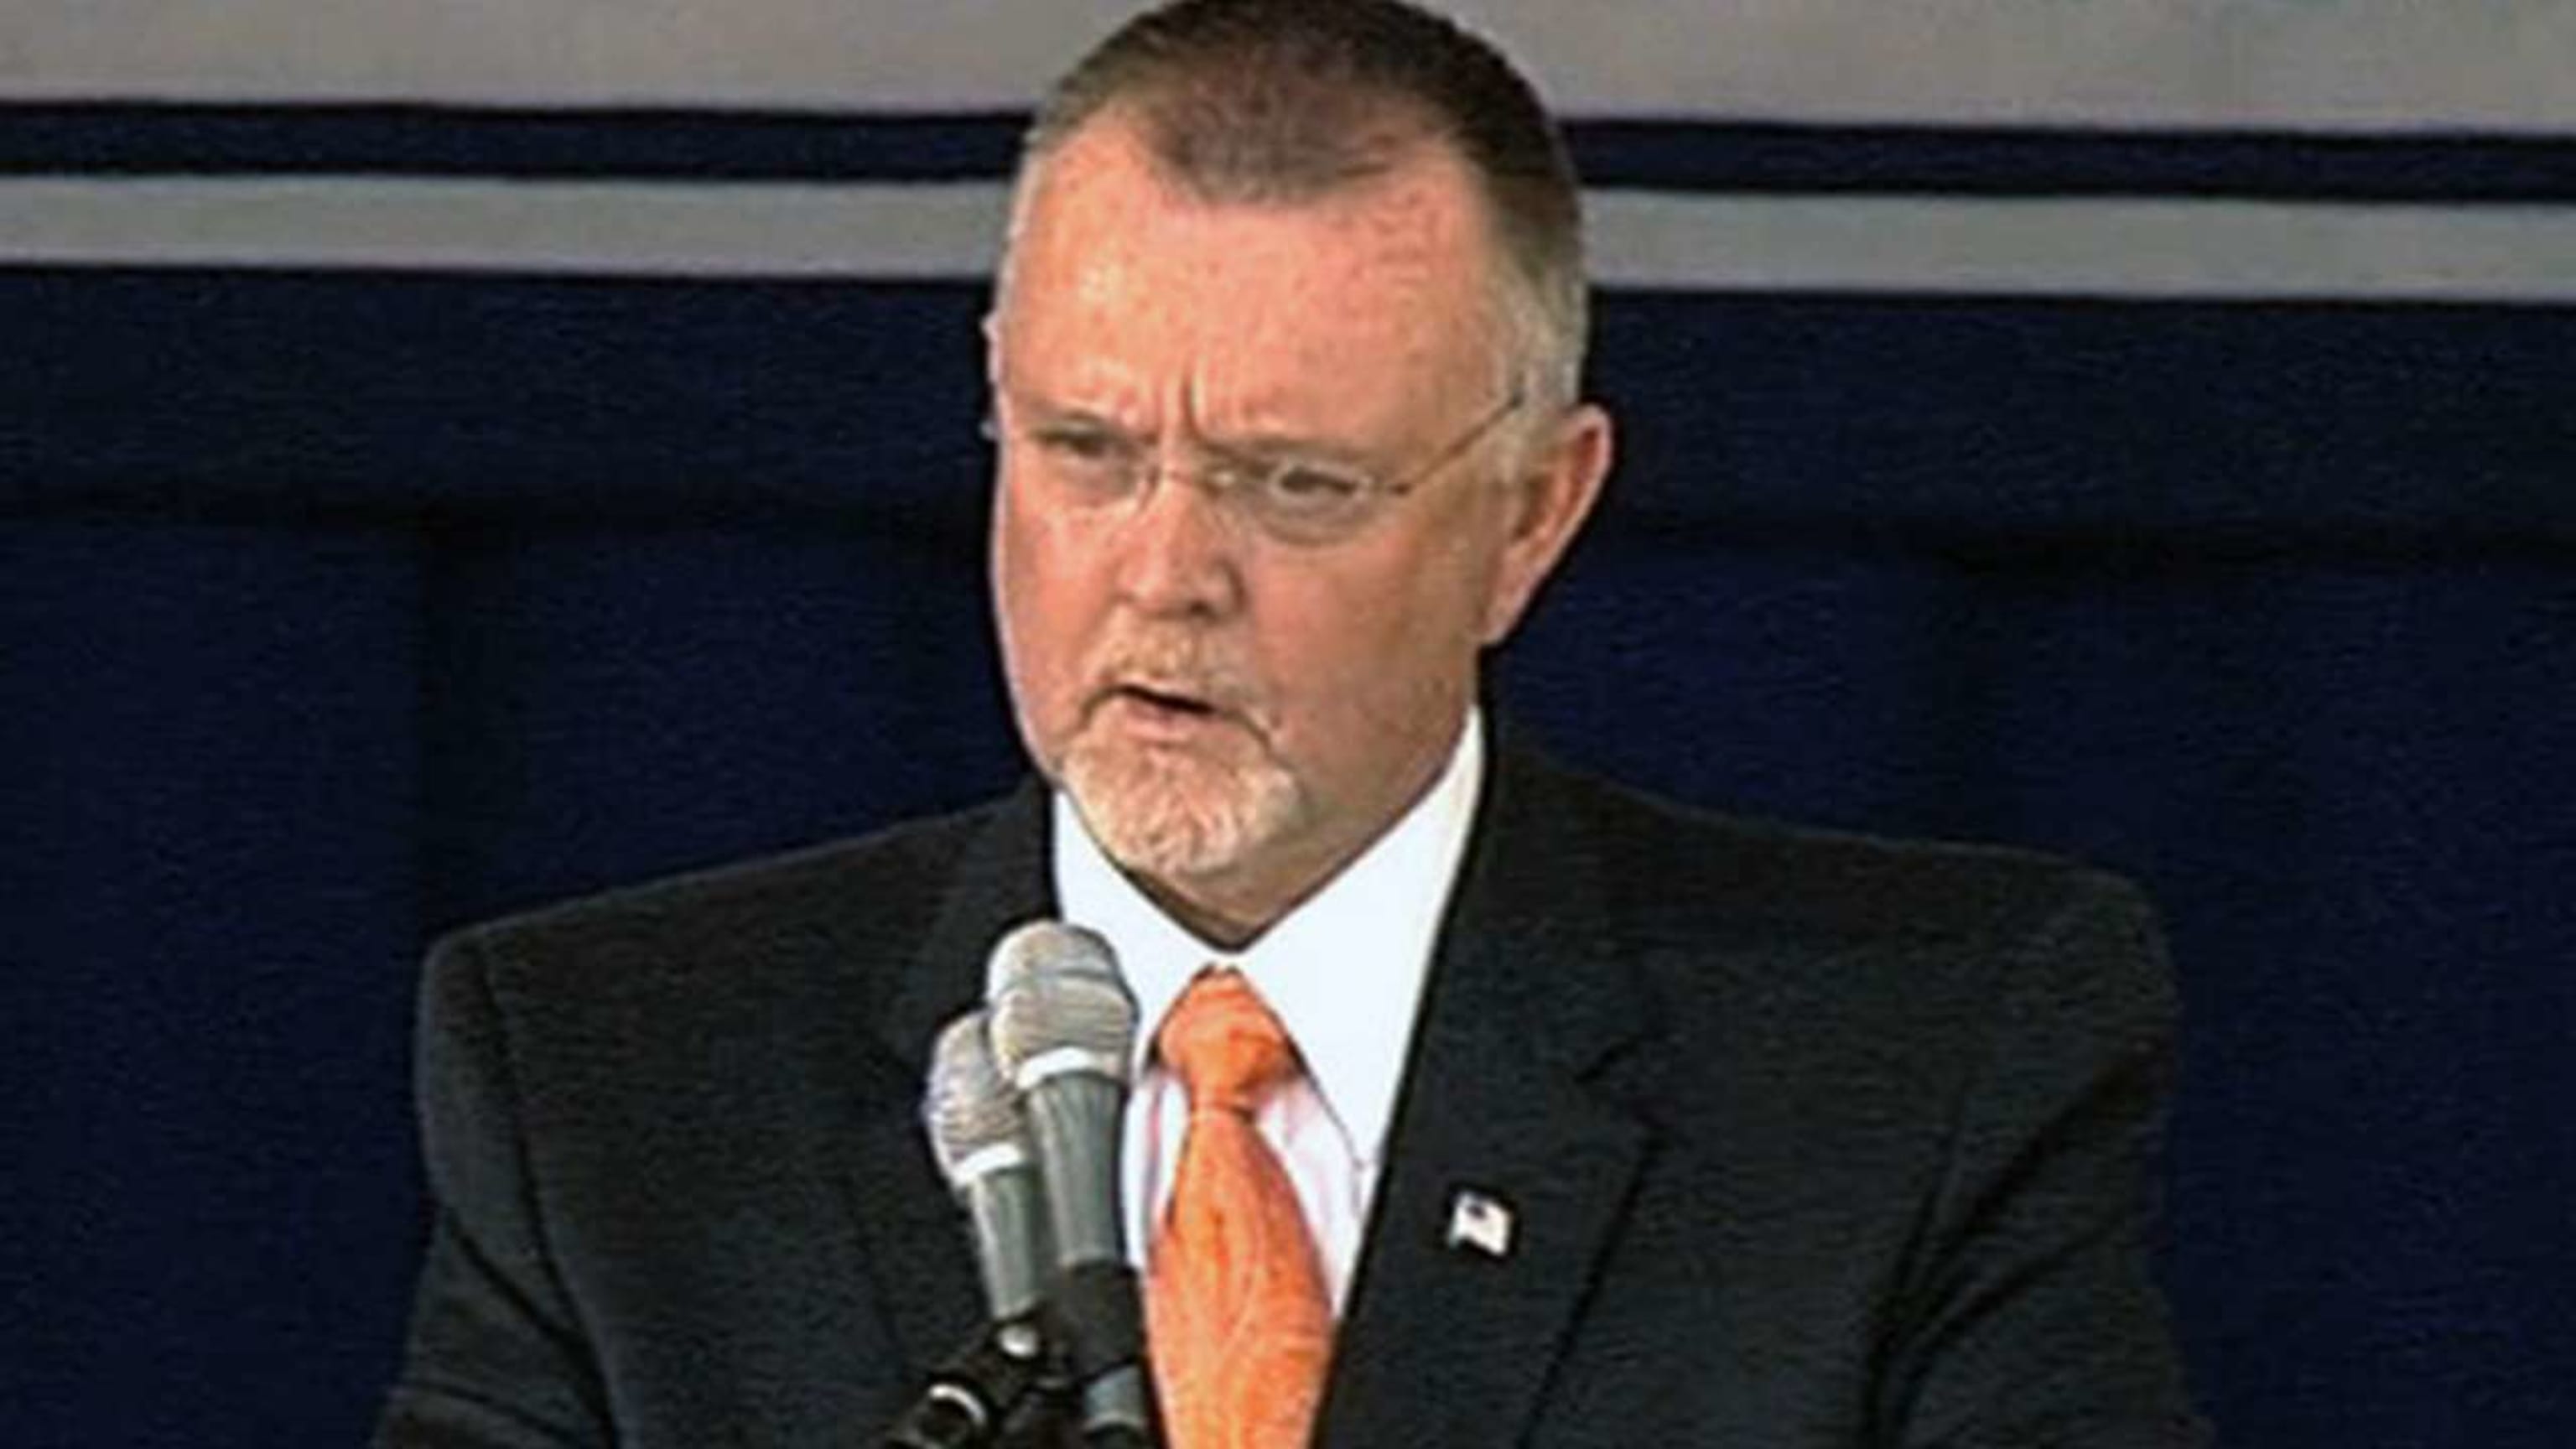 Blyleven enters the Hall of Fame